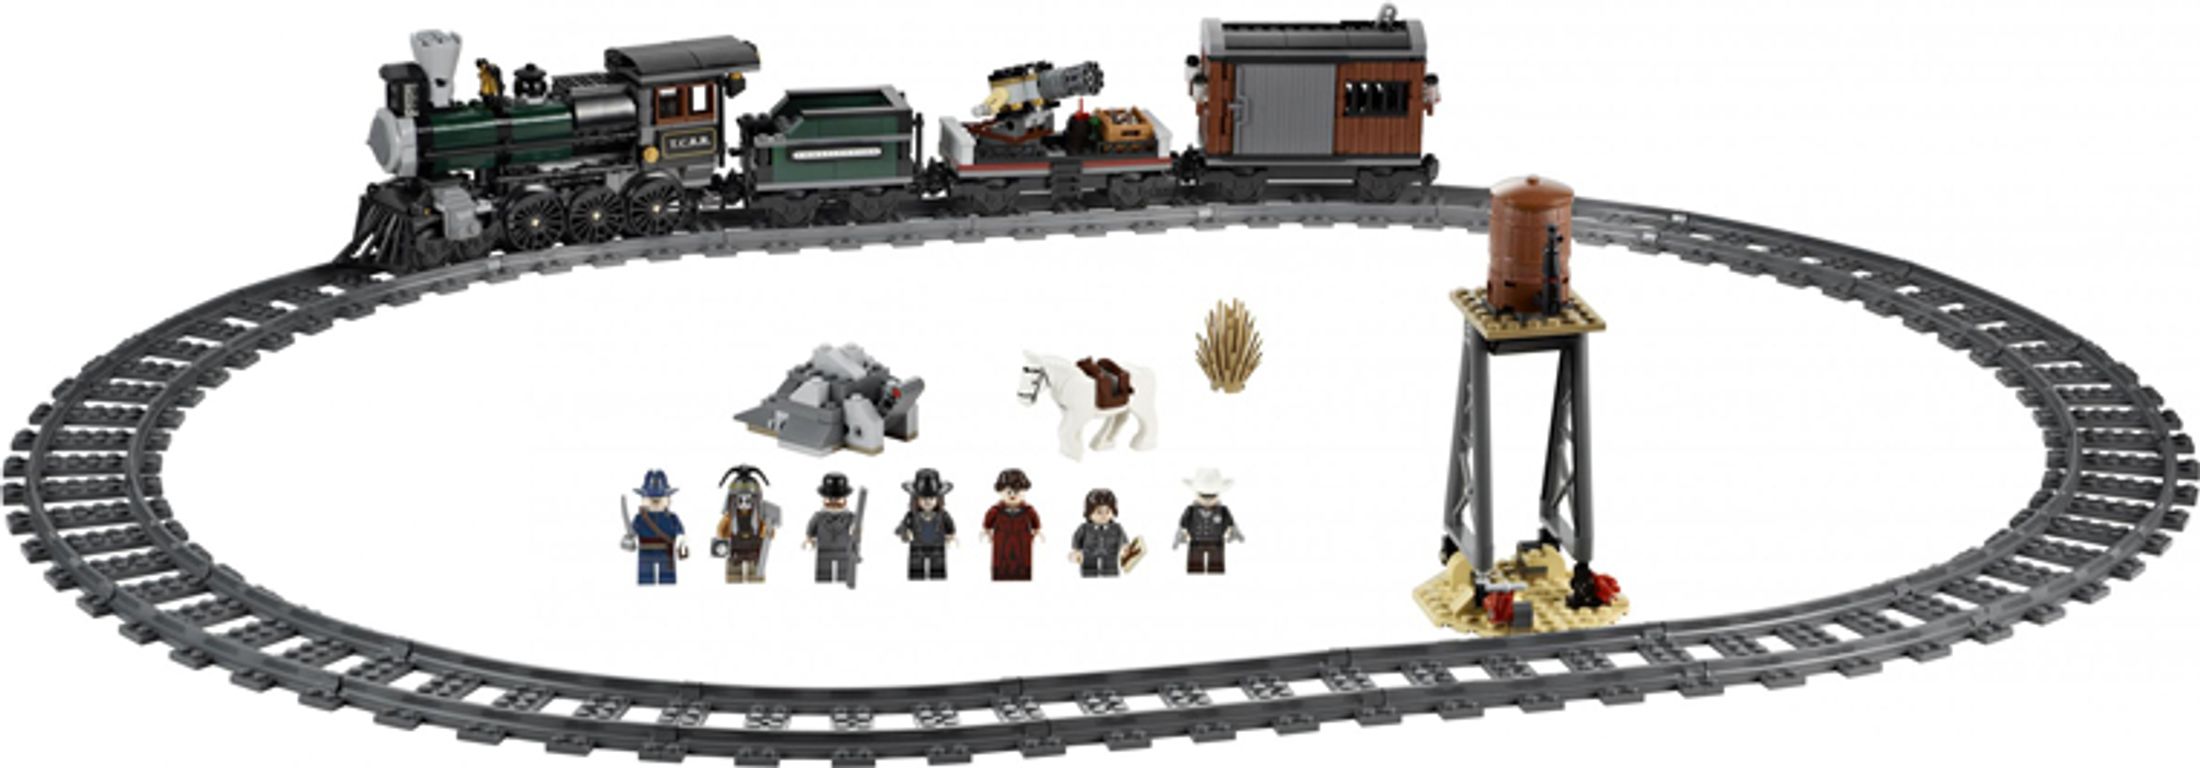 LEGO® The Lone Ranger Railway Hunting components